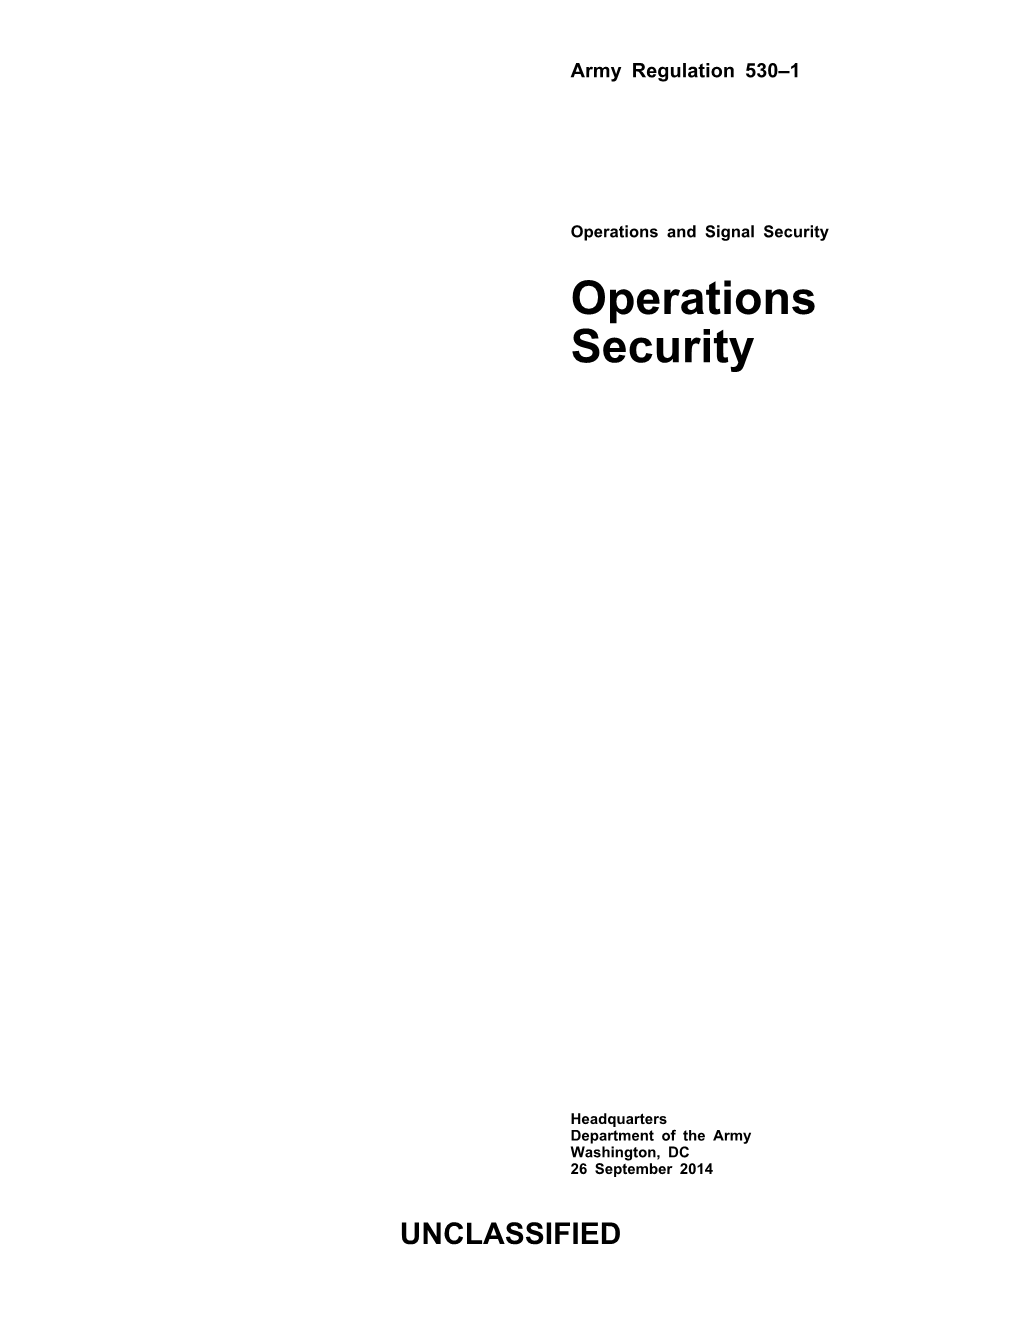 Operations Security (OPSEC) Army Regulation 530-1 (Pdf)